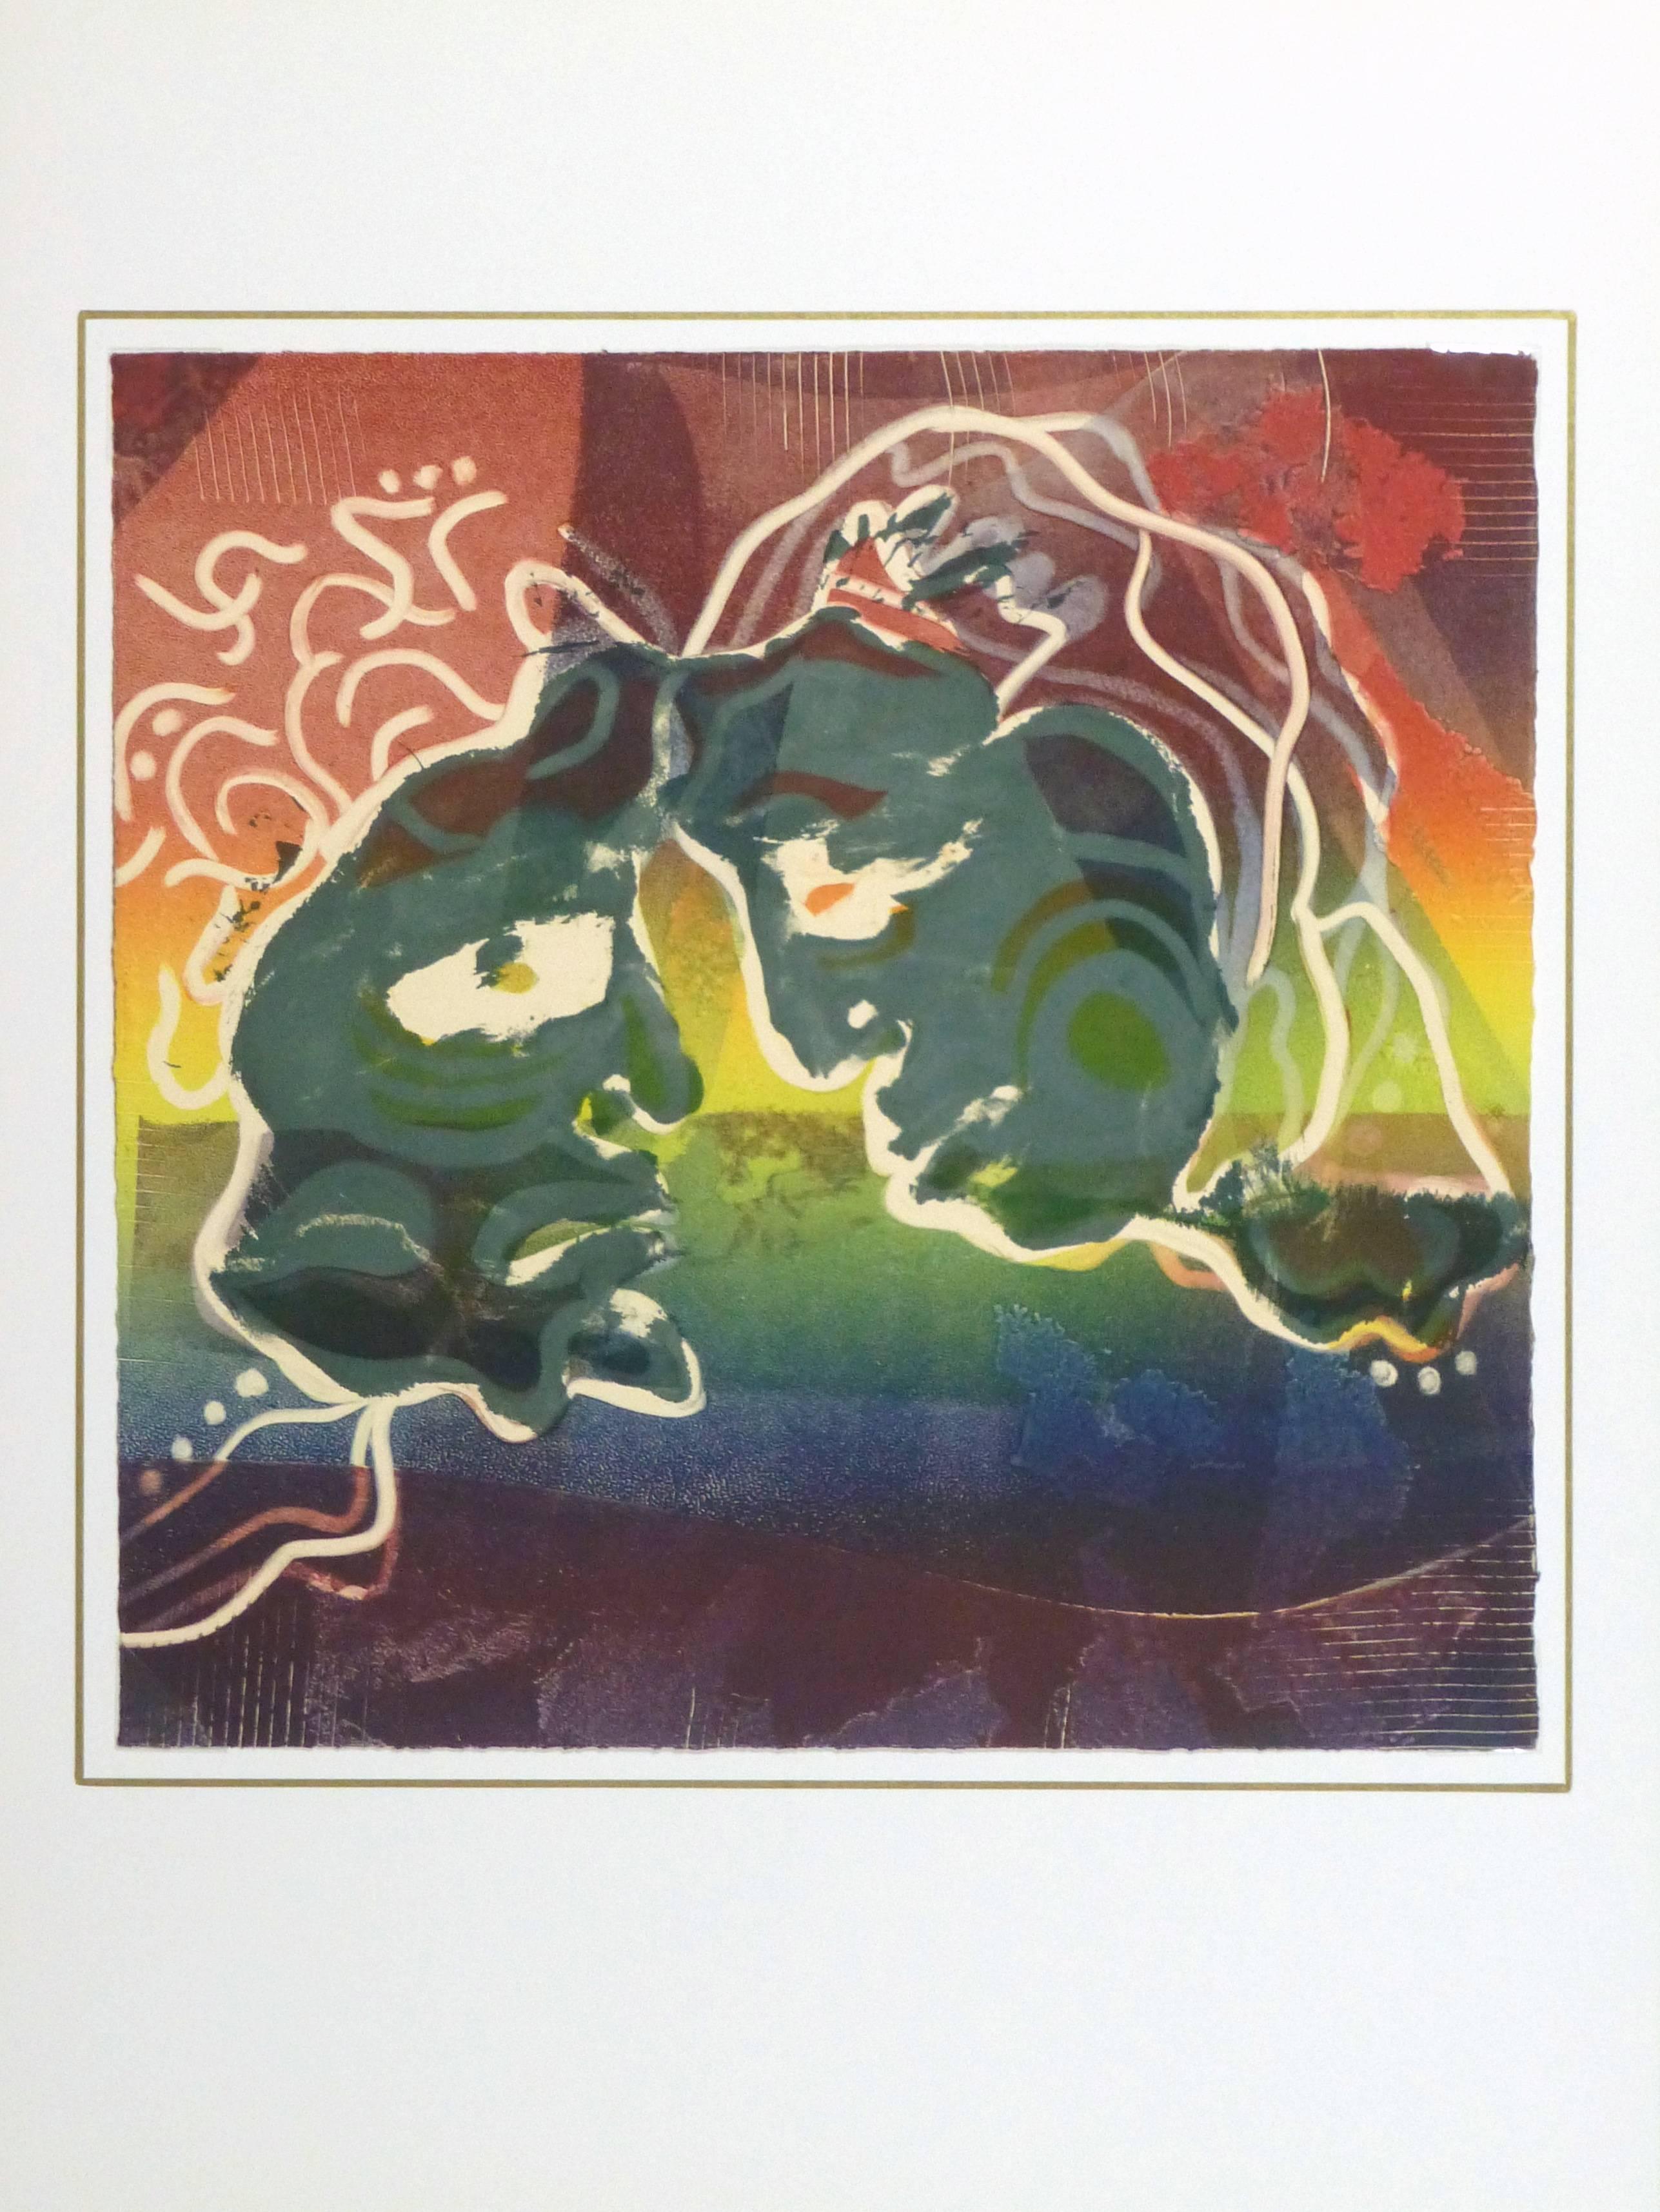 Brilliantly colored mixed media monotype of opposing faces in profile by American artist Kismine Varner, circa 1990.  

Original one-of-a-kind work of art on paper displayed on a white mat with a gold border. Mat fits a standard-size frame. Archival